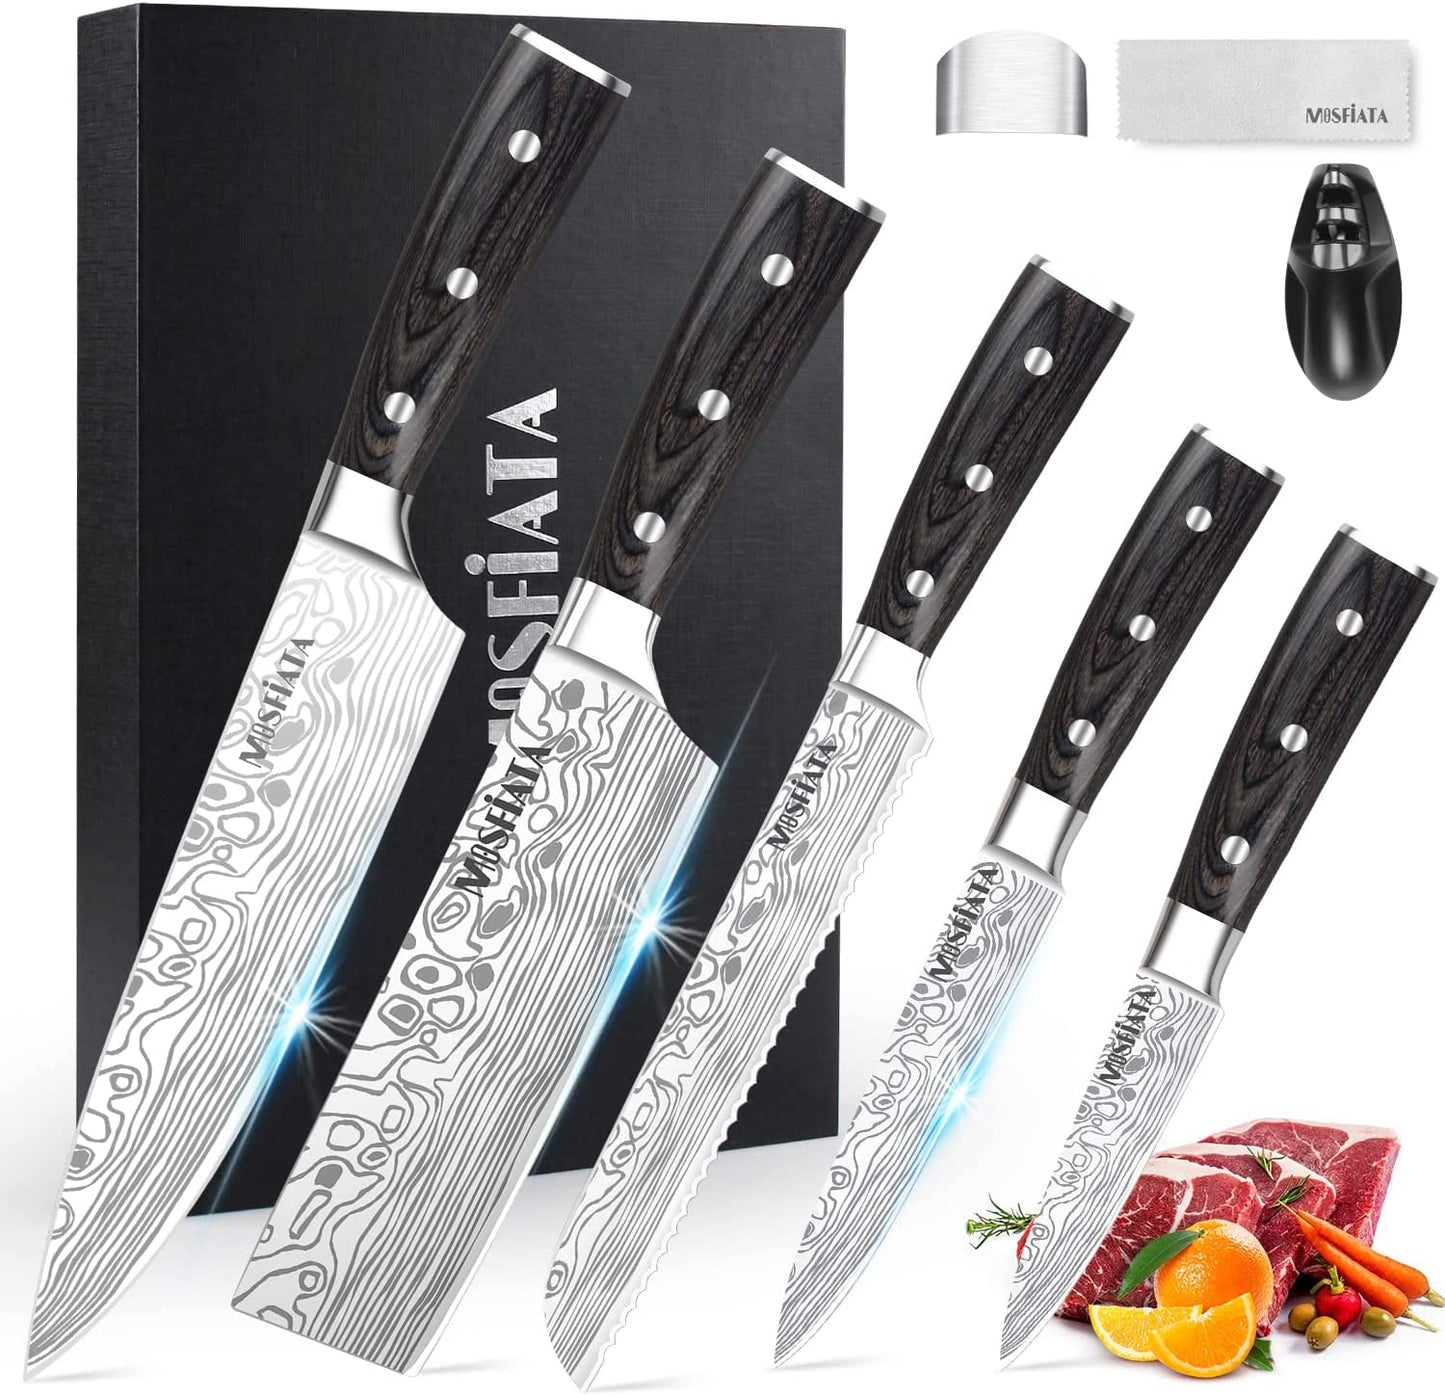 MOSFiATA 5” Chef Knife and 3.5 Fruit Knife Set with Knife Sheath, German  High Carbon Stainless Steel EN.4116 with Micarta Handle and Gift Box for